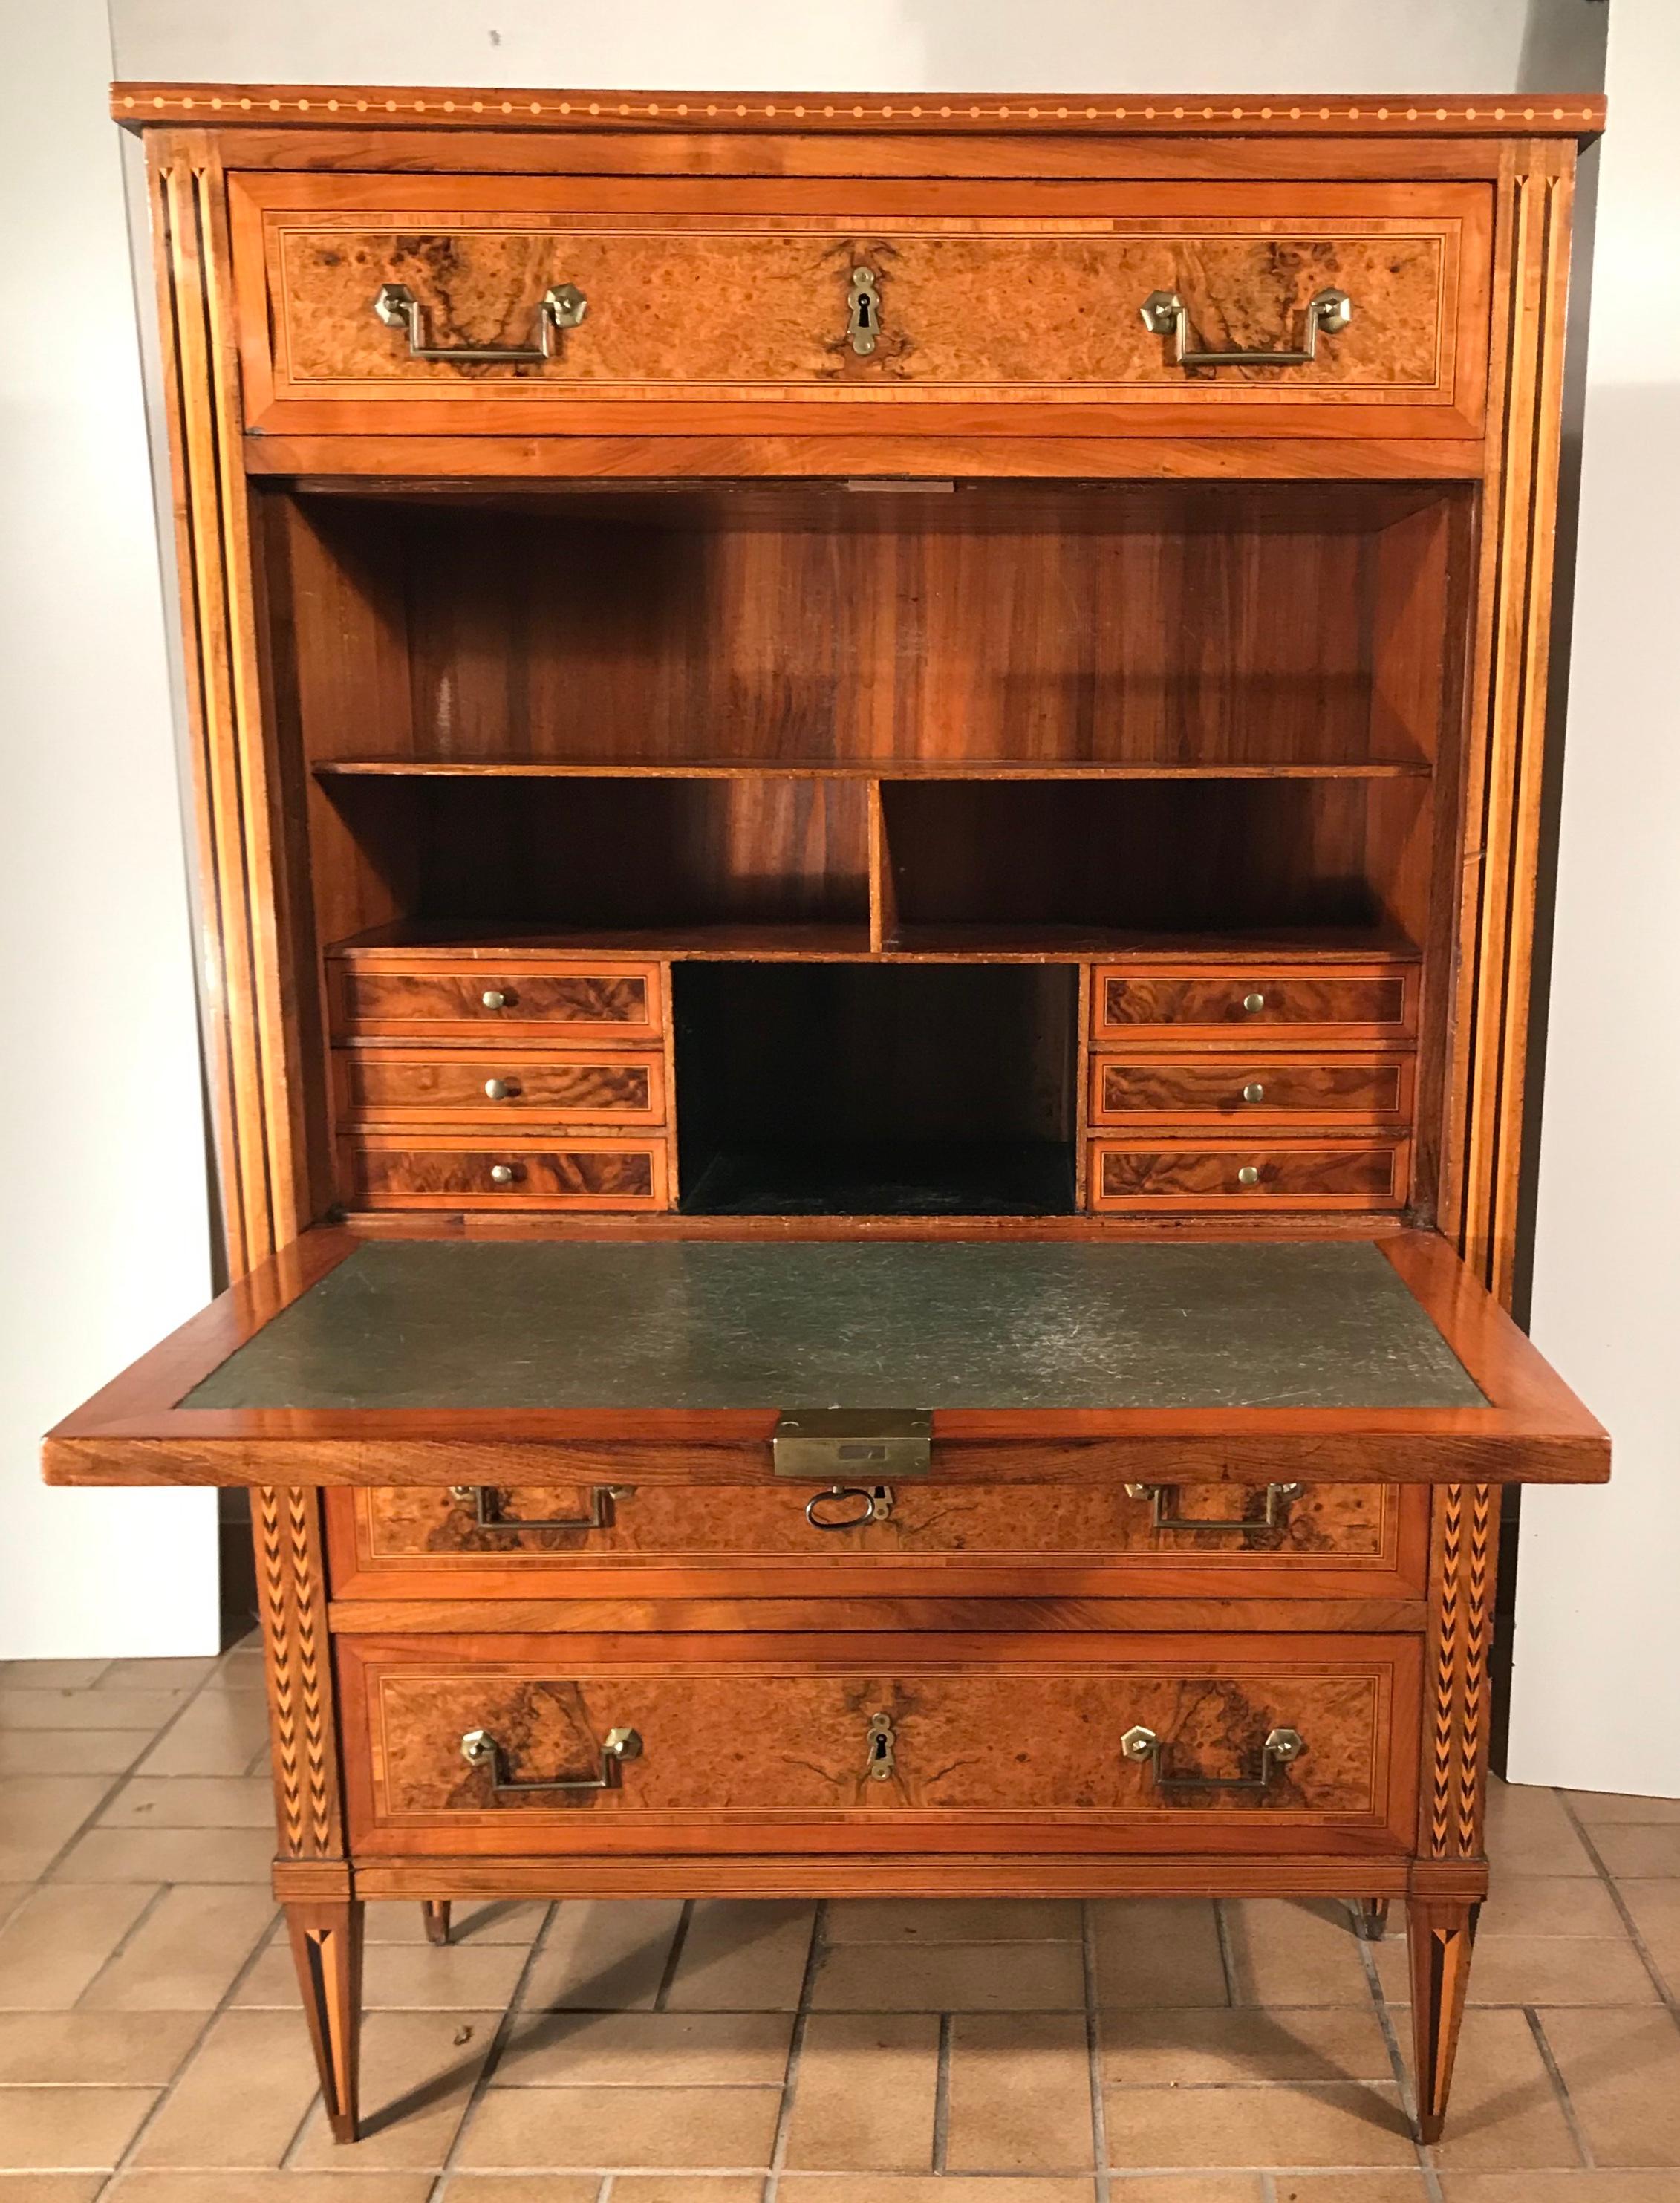 Exquisite Louis XVI drop front desk, France 1780, walnut root veneer with details in cherry, plum and boxwood veneer and marquetry. The special something about this secretaire is the outside of its writing top. It has a stunning mirrored walnut root